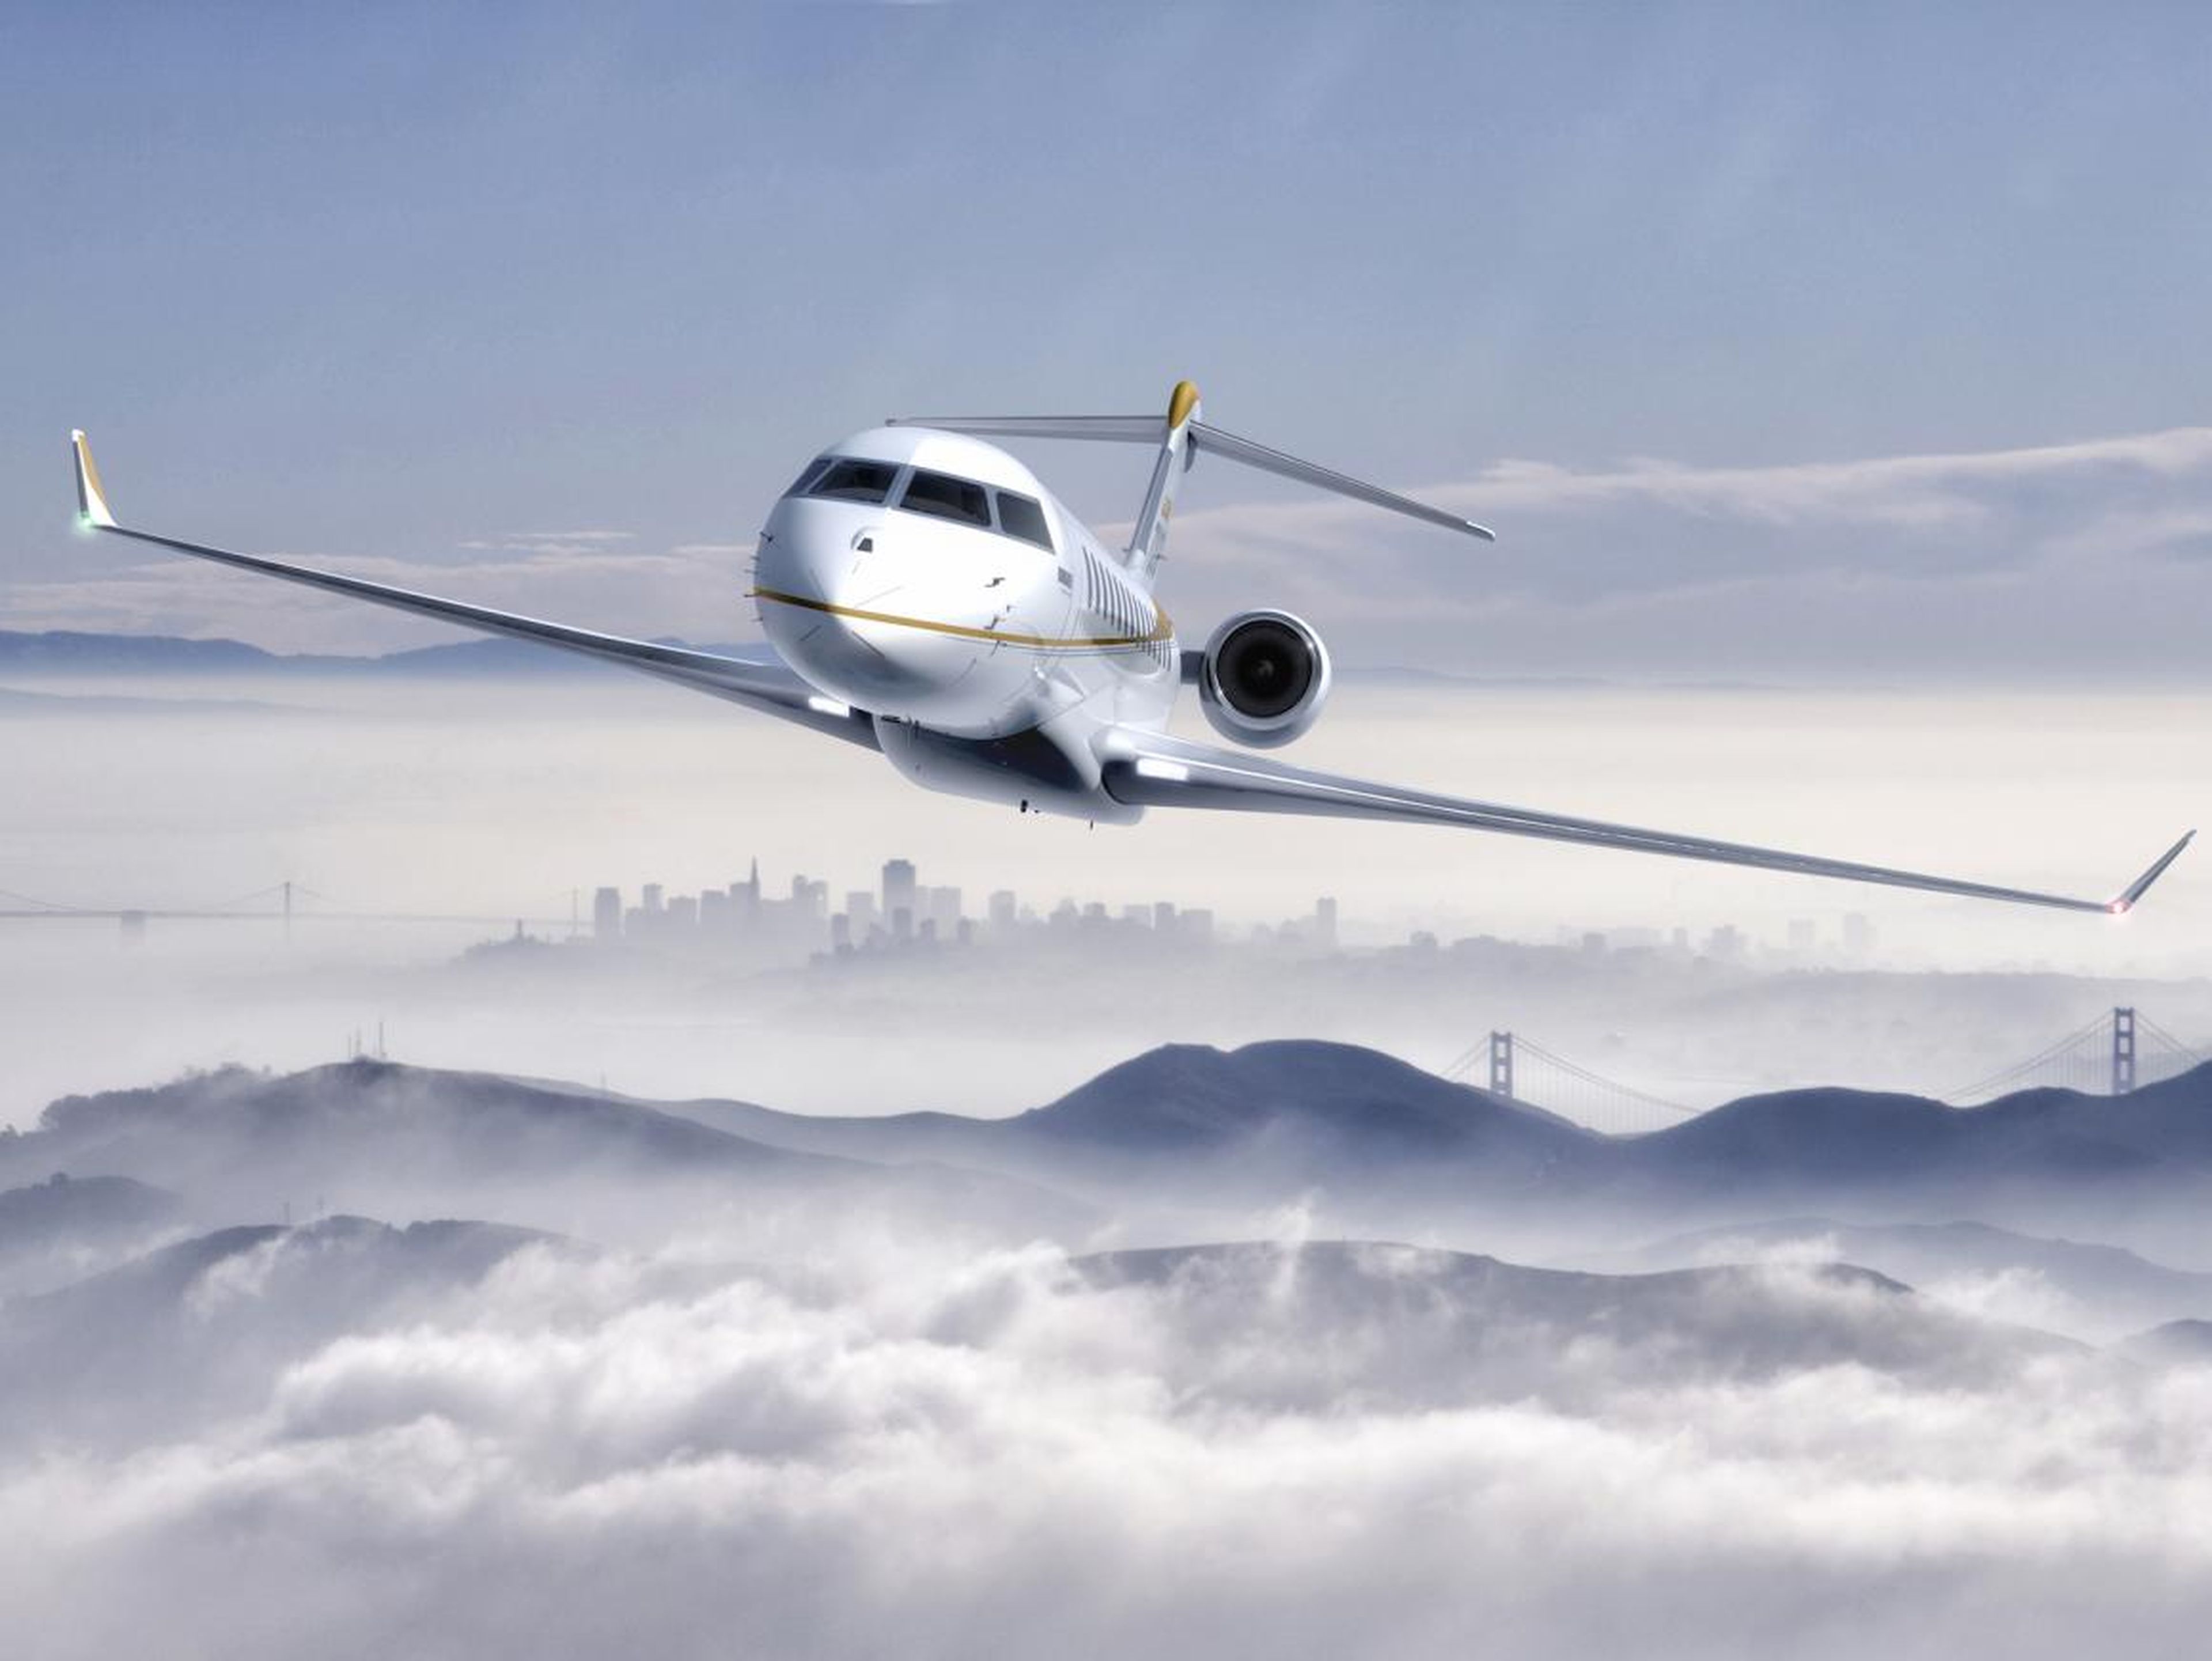 Bill Gates owns a relatively modest $40 million Bombardier BD-700 Global Express plane.